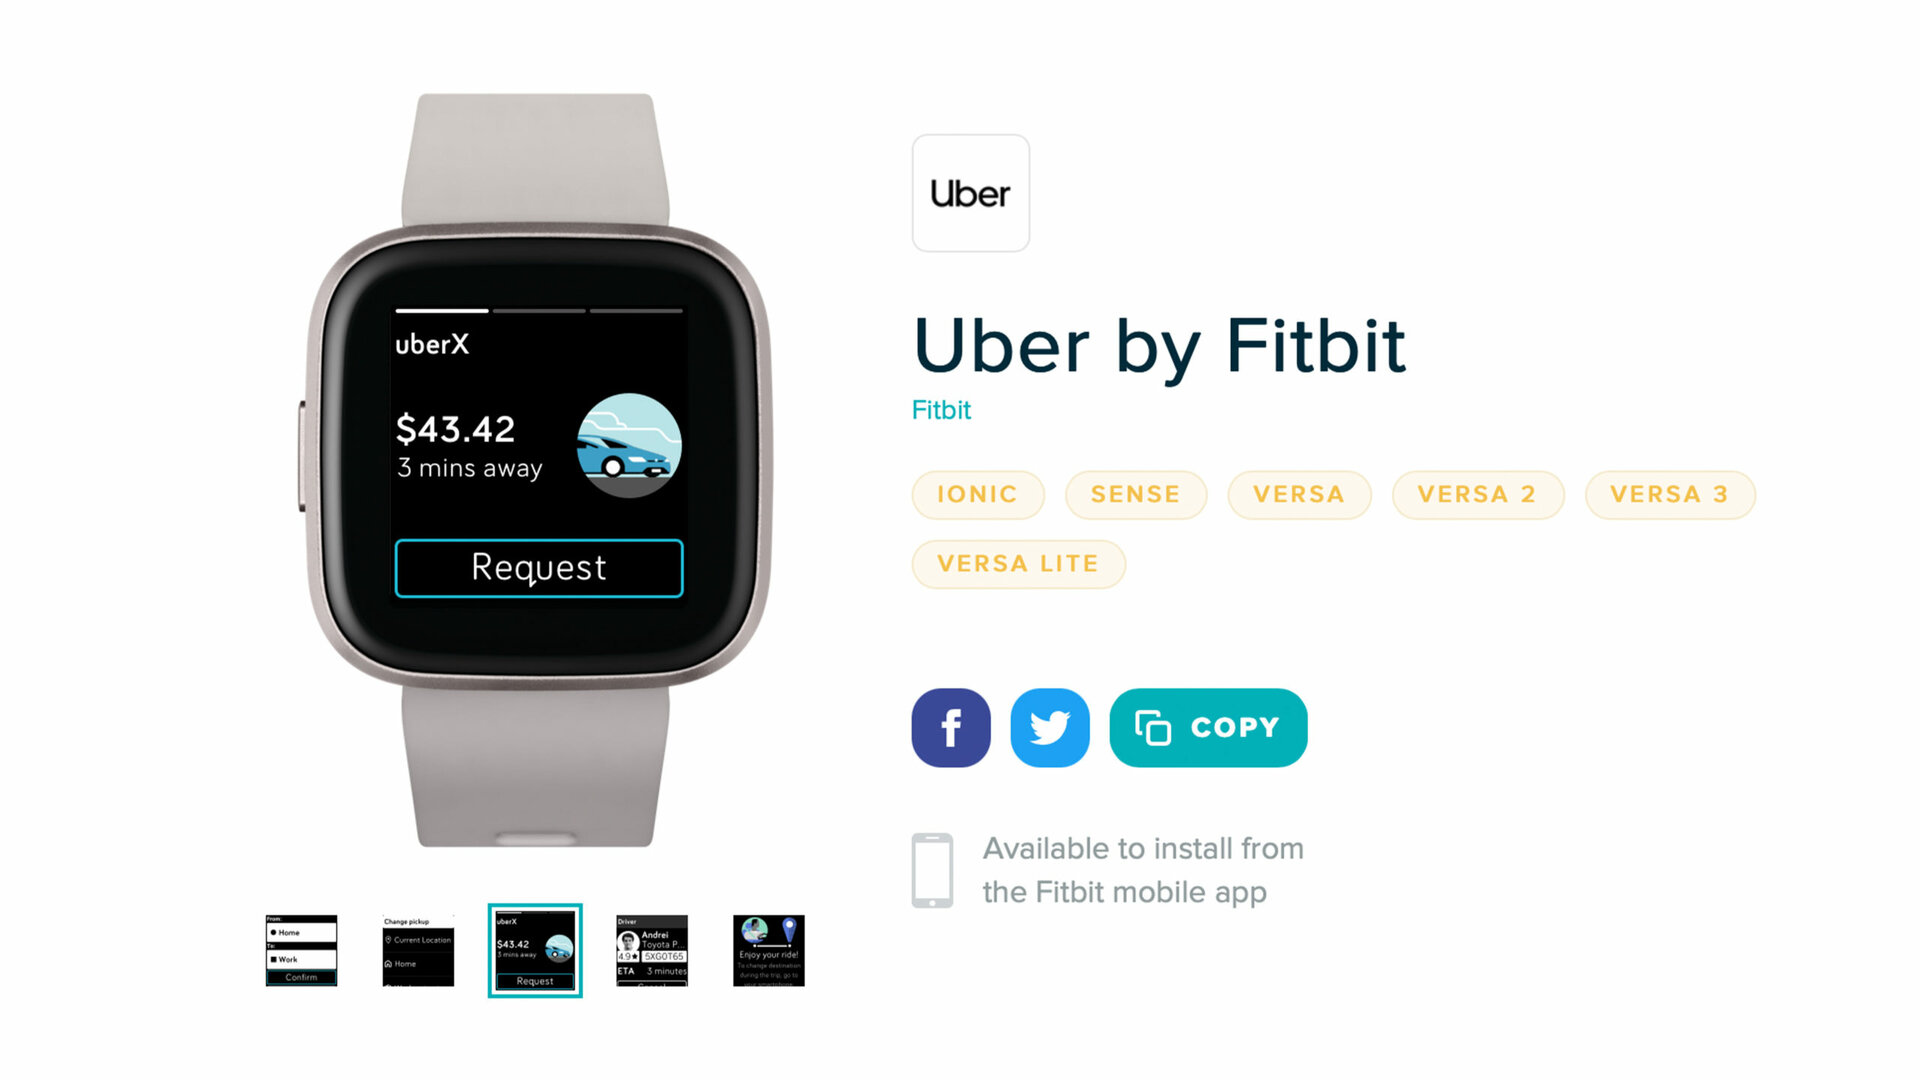 Information about the Uber app for Fitbit devices.